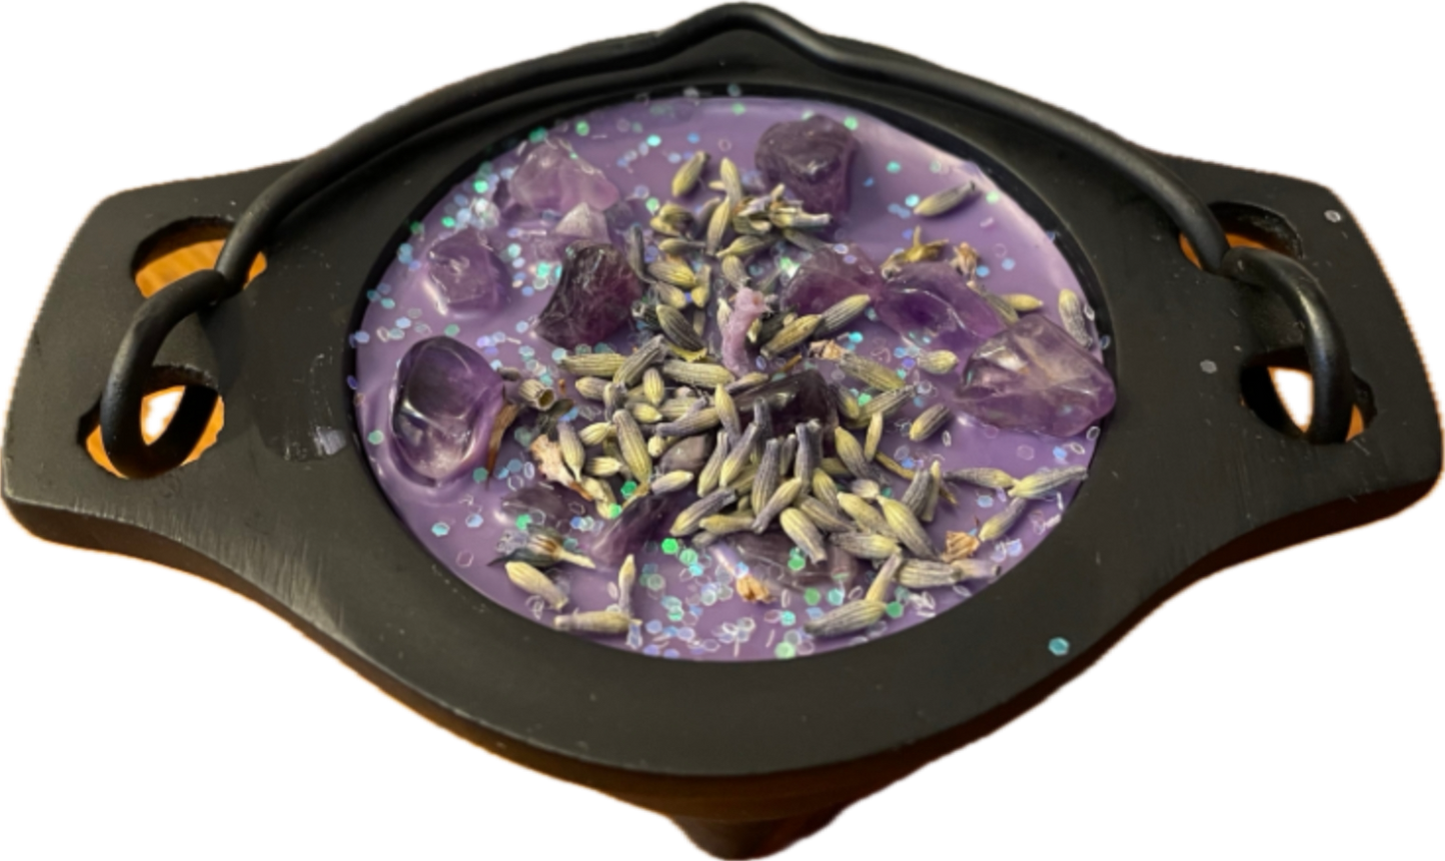 Magic Cauldron Candle - Lavender with Amethyst and Lavender Herb